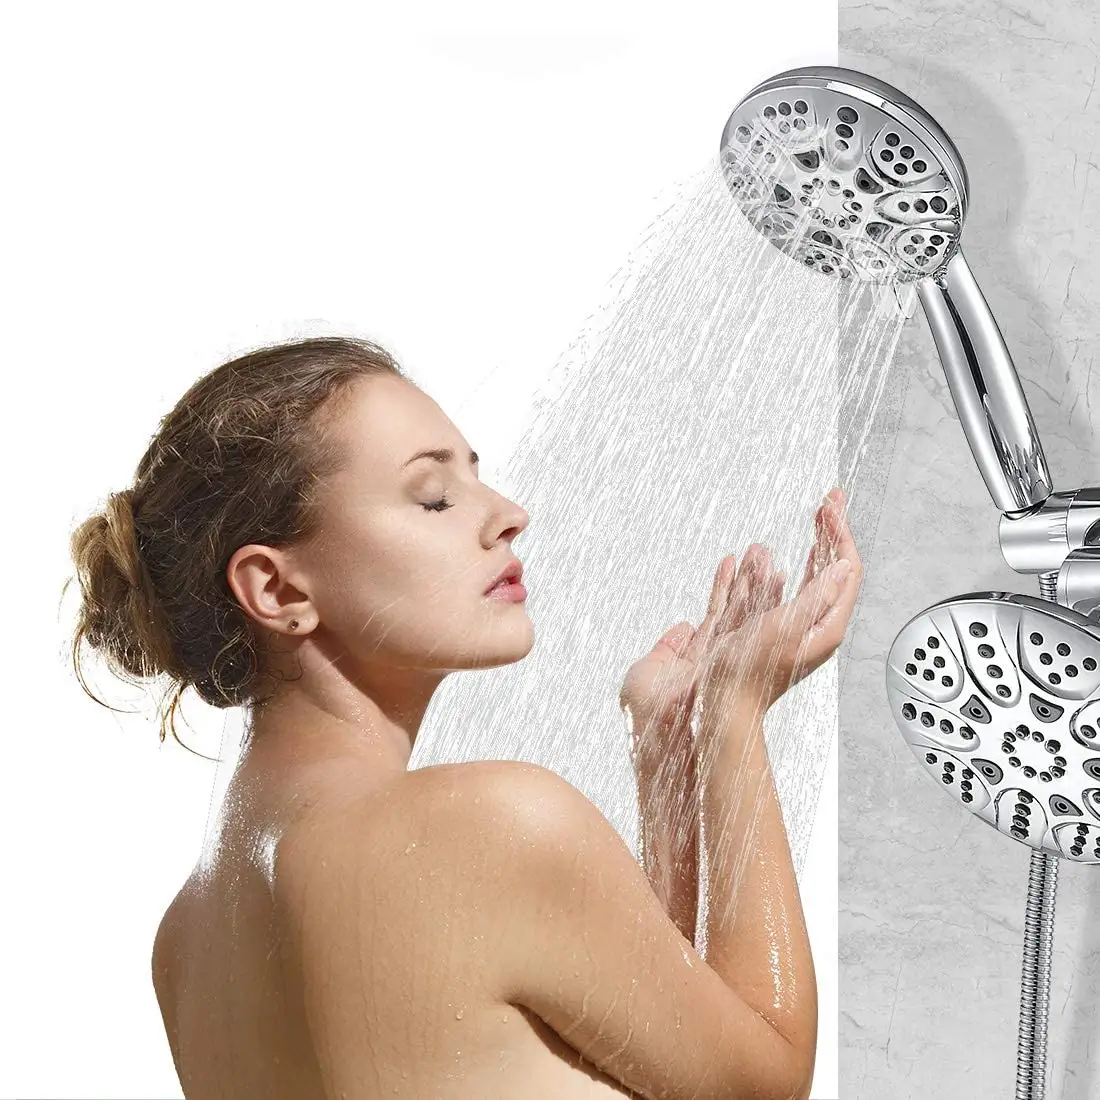 Amazn Hot Selling CUPC 6Functions ABS Spa Hand Showerhead and Rain Shower Combo Dual 2 in 1 Shower Head System